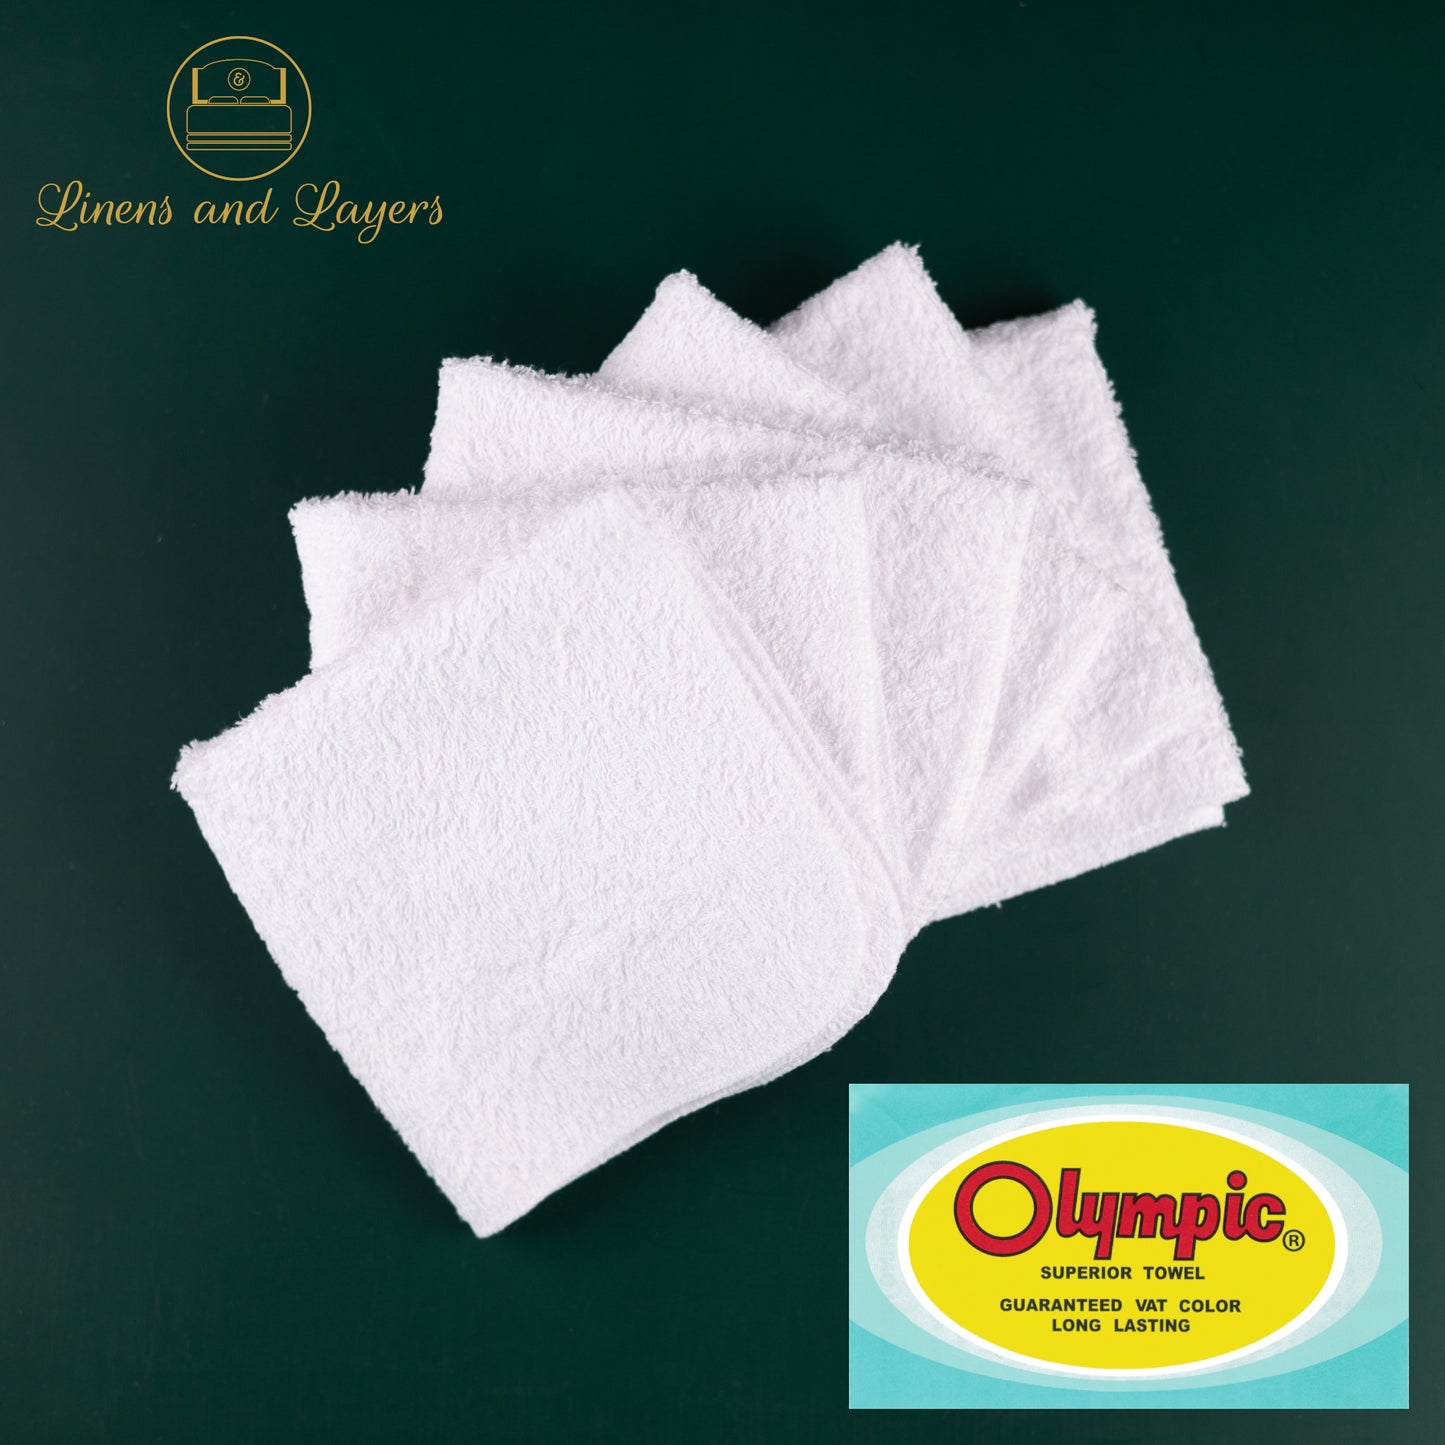 Olympic White Face Towel (430 GSM) - DK-1212 Terrycloth - 12x12 inches